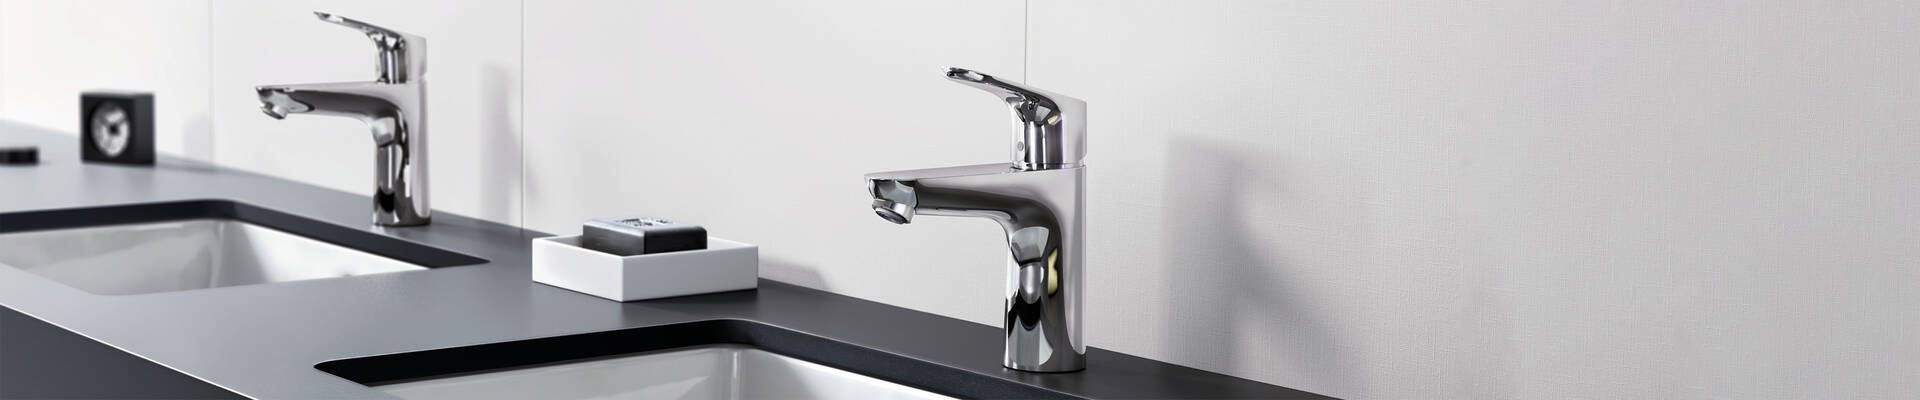 Stage Focus 100 Basin Mixers Ambience 3840x800 ?format=HBW20